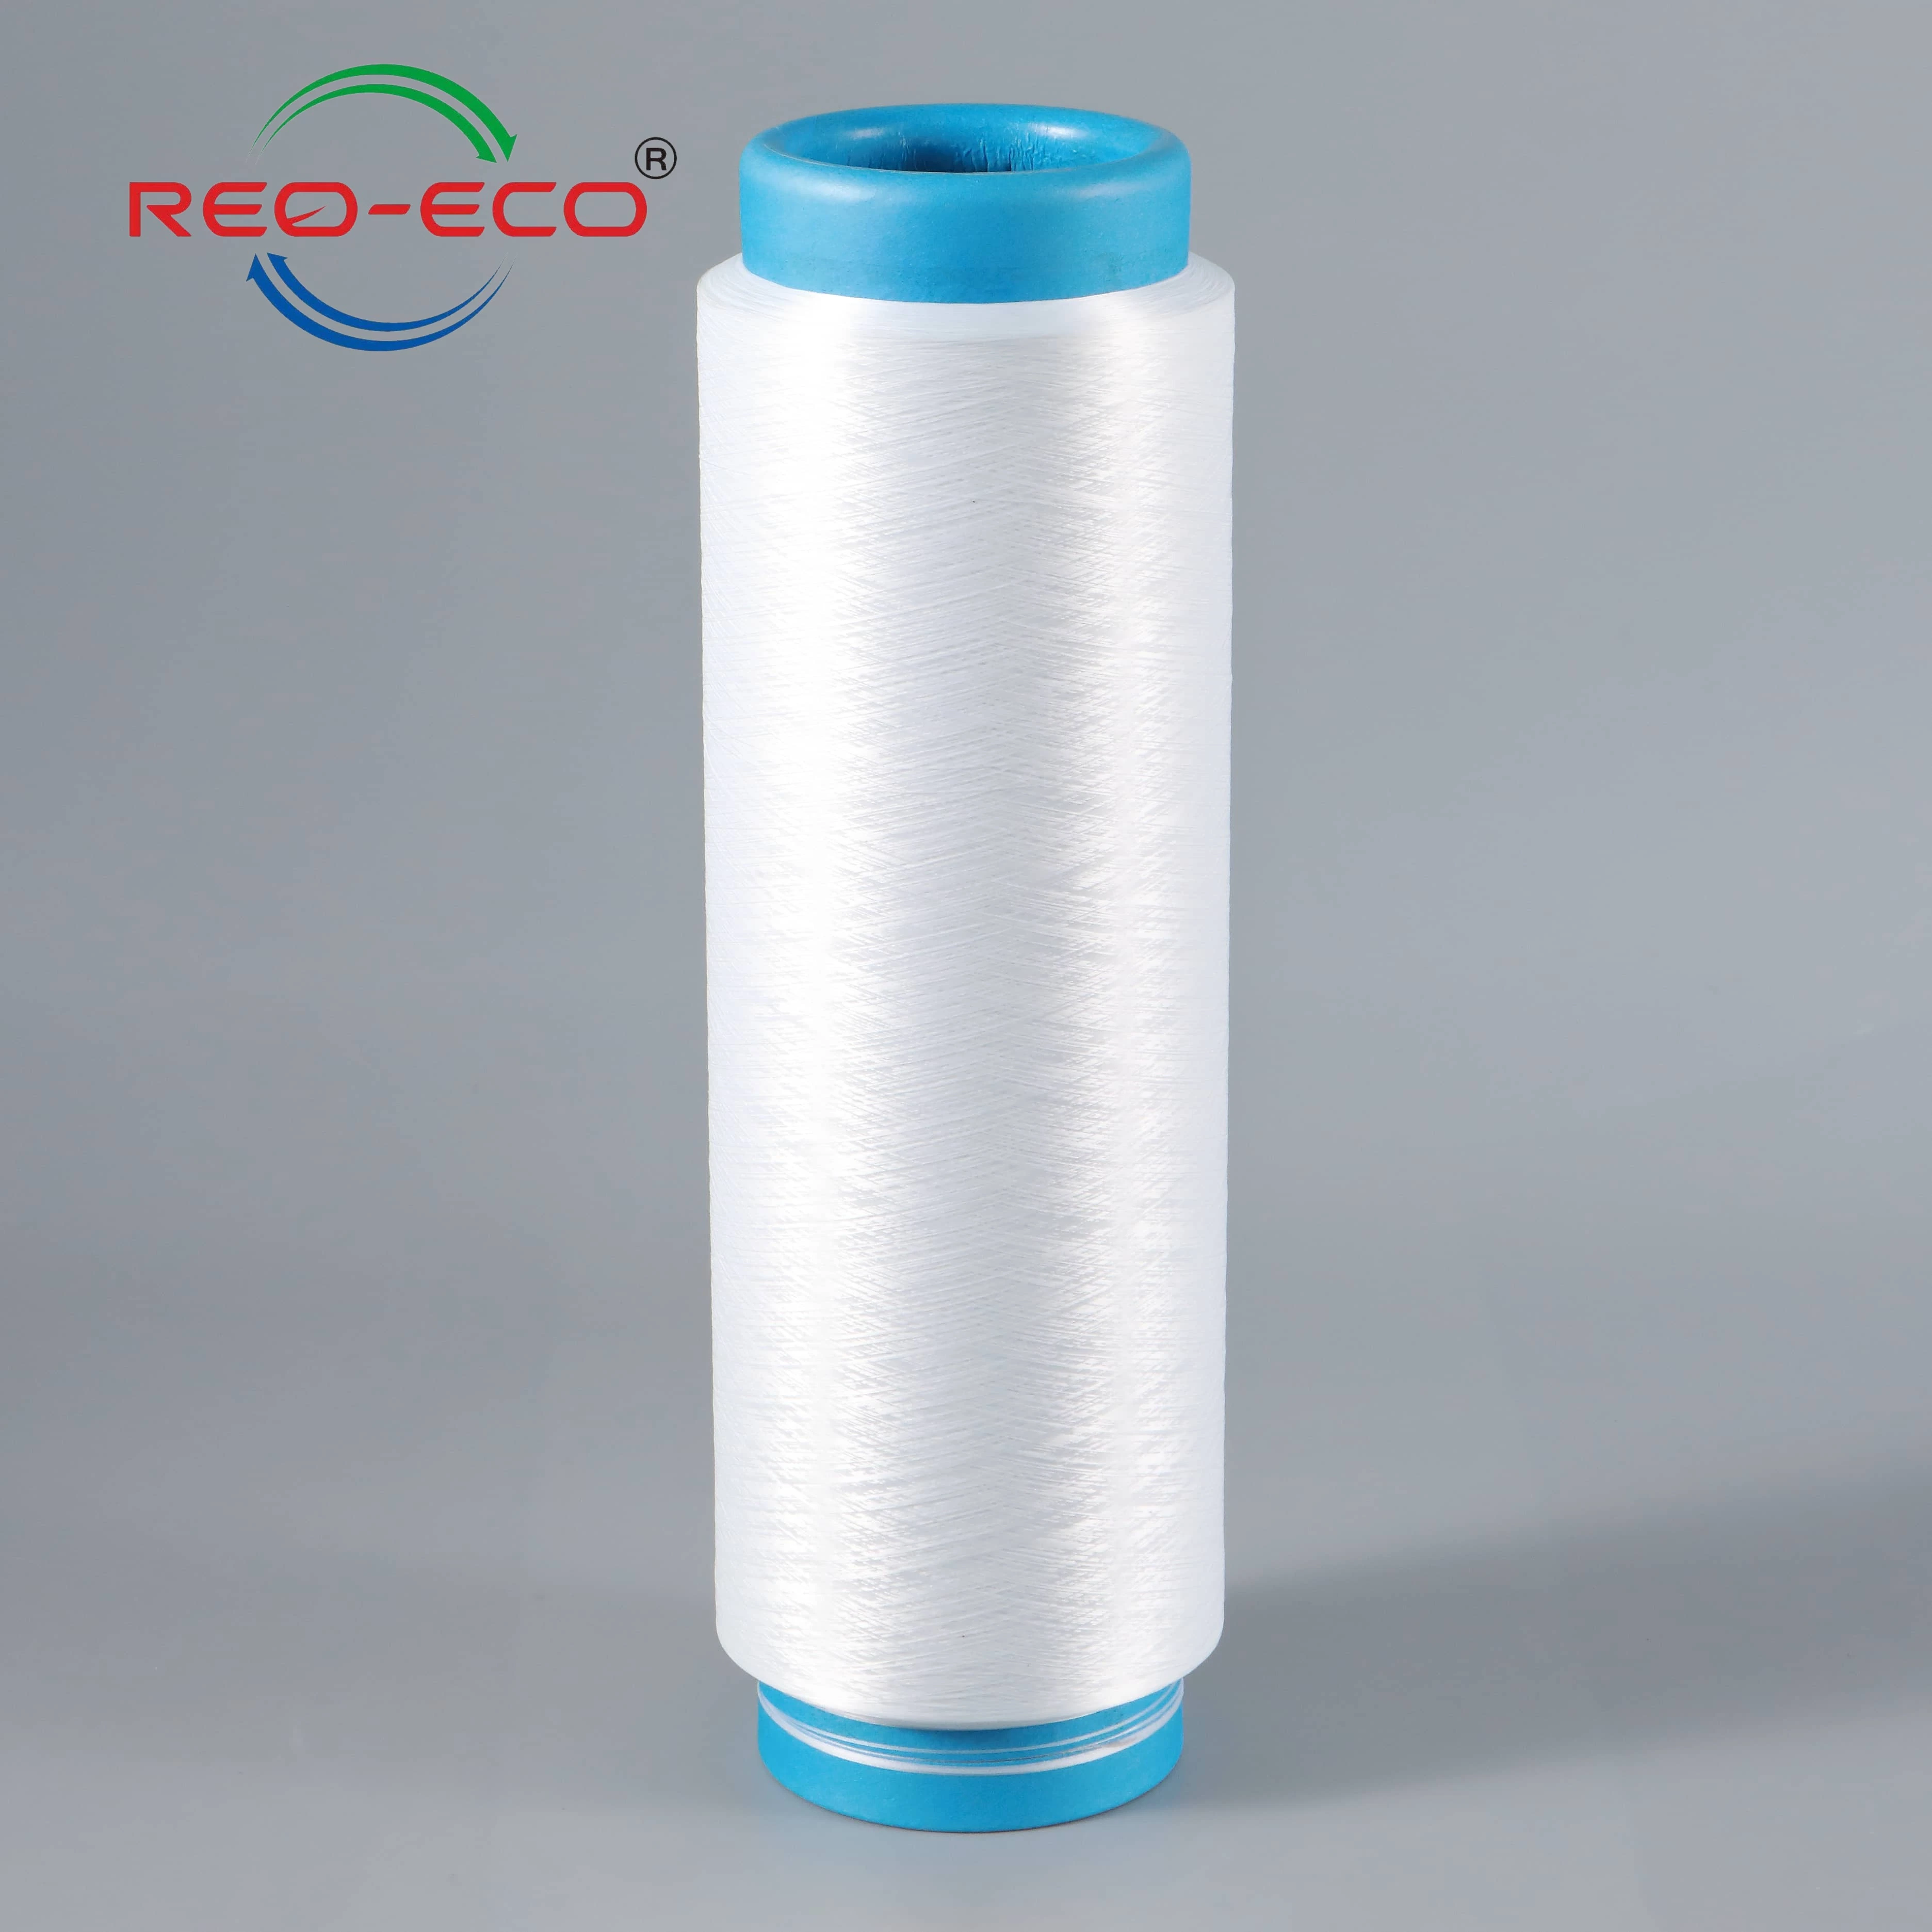 Grs Certification 100d/96f DTY Reo-Eco 100% Recycled Polyester Filament Yarn